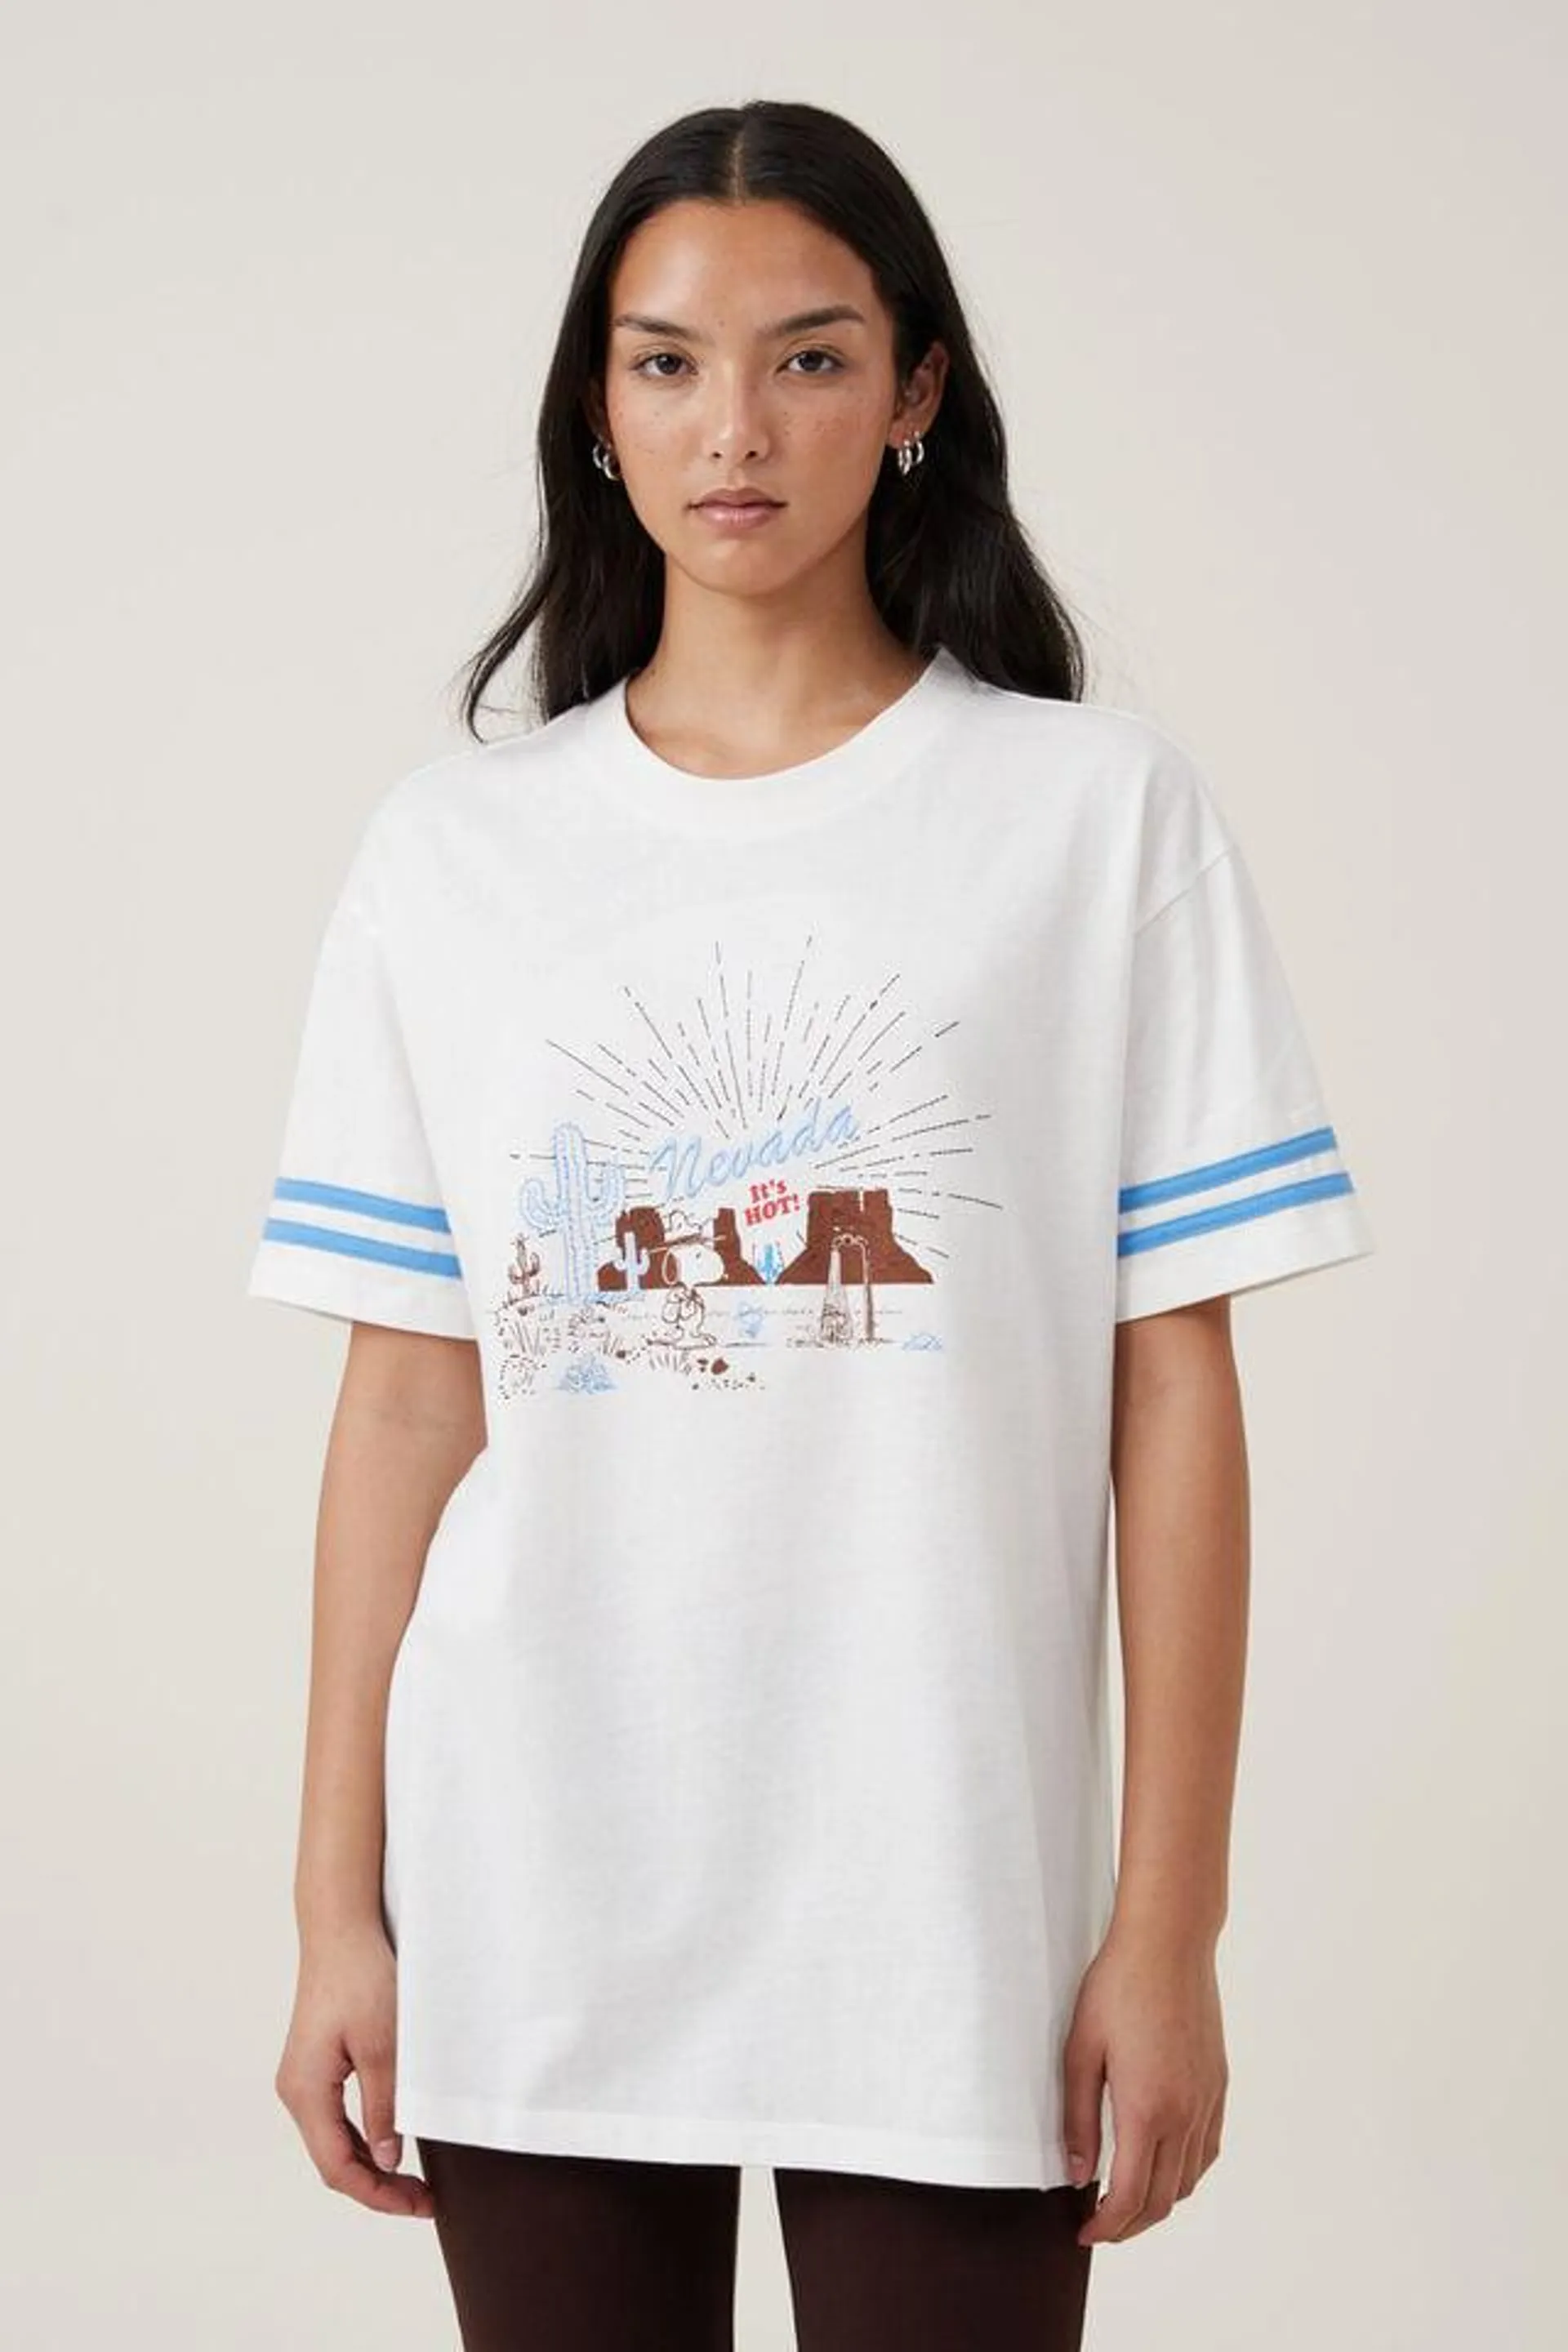 The Oversized Snoopy Tee